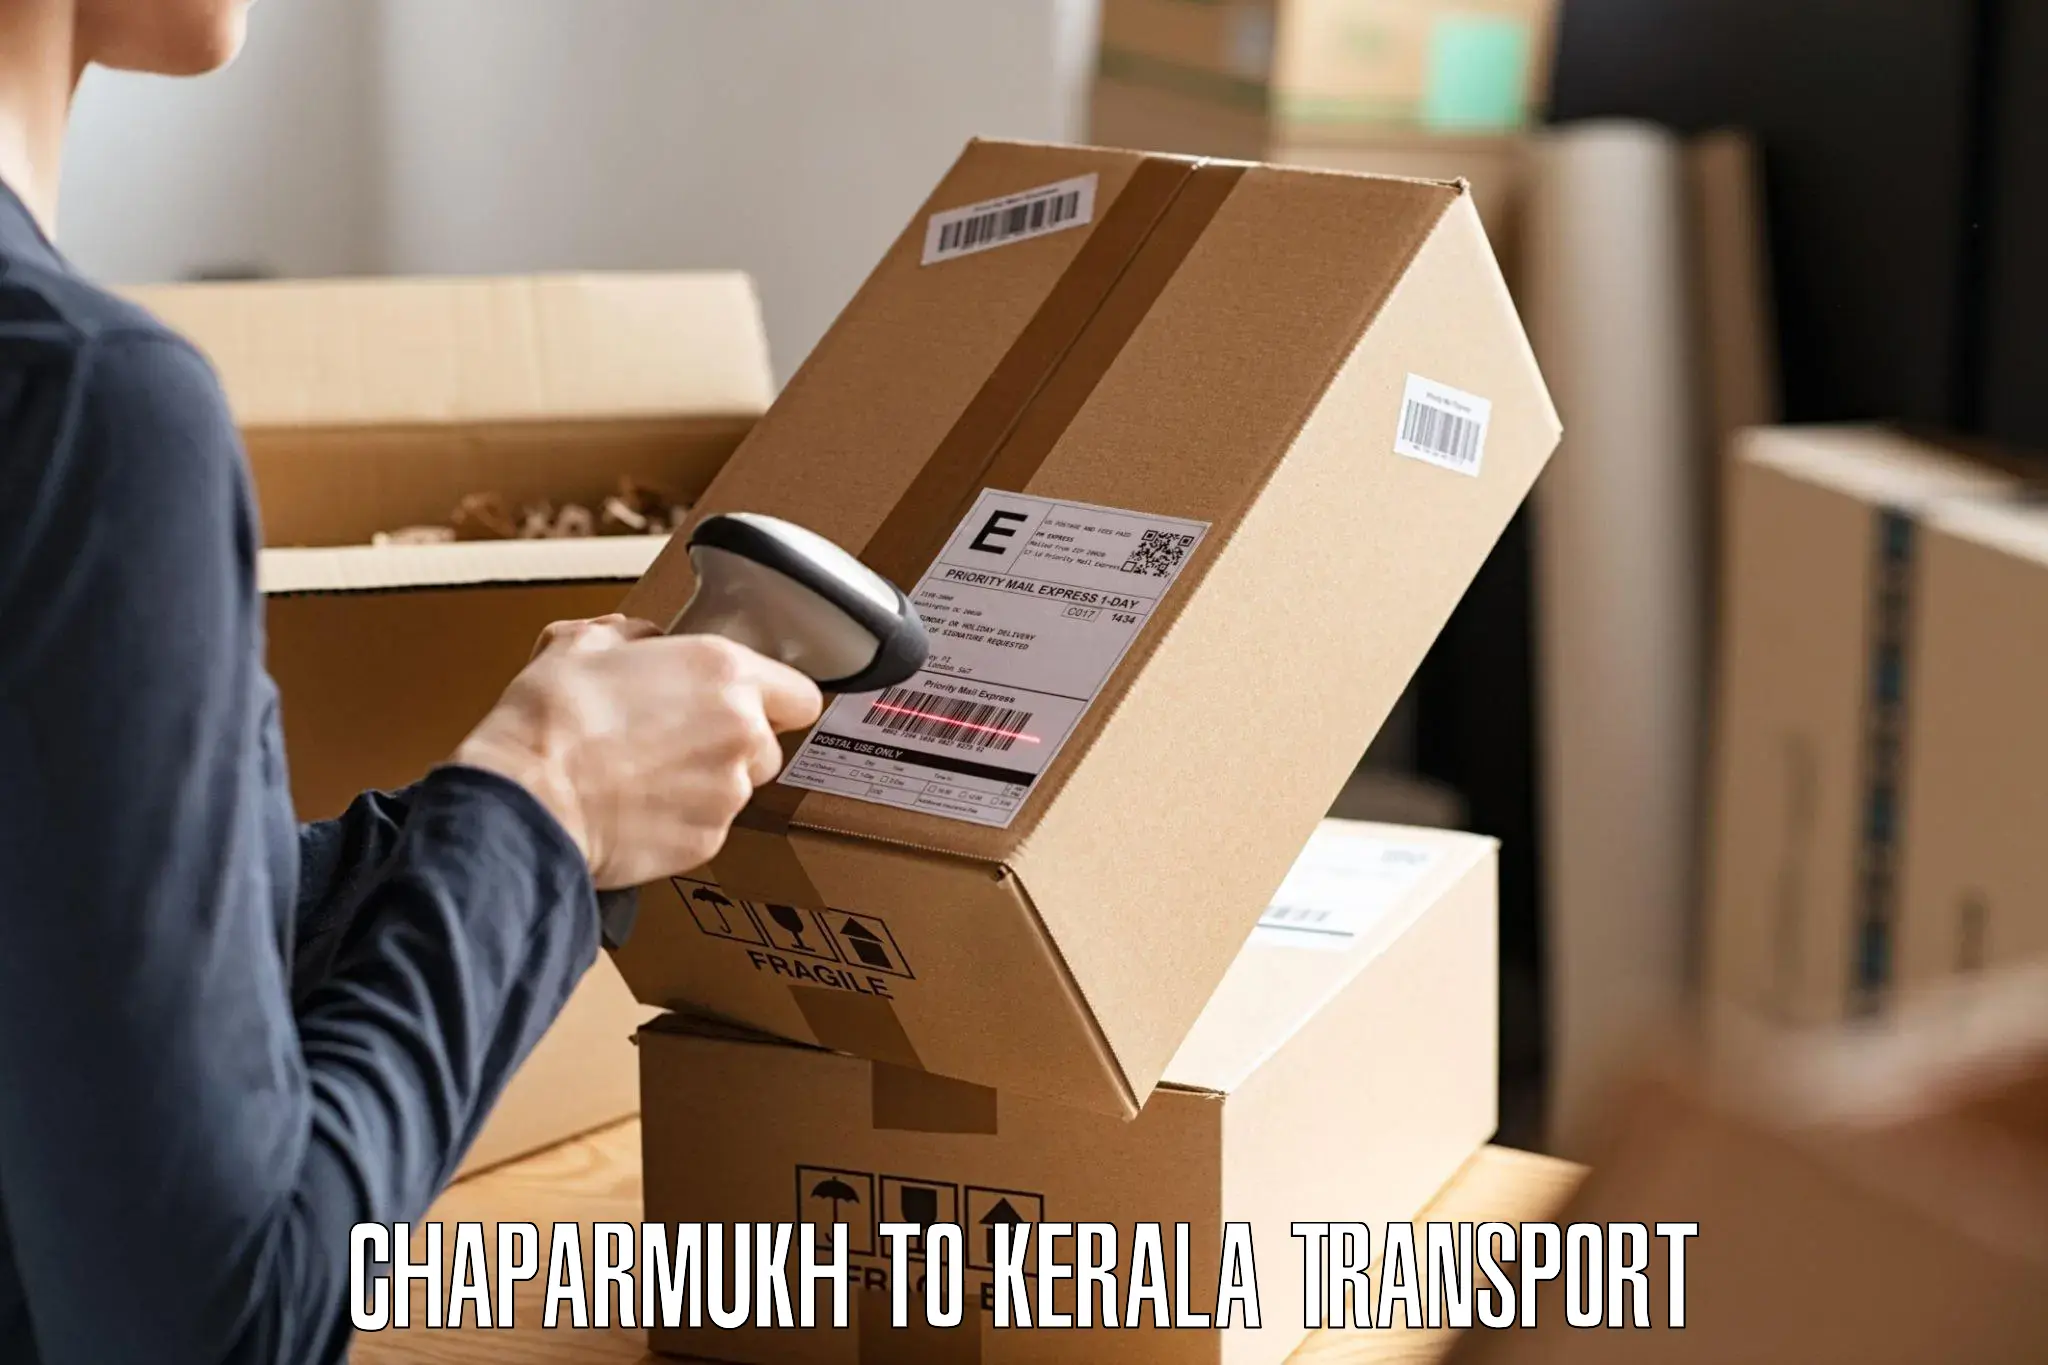 Daily transport service Chaparmukh to Kodungallur